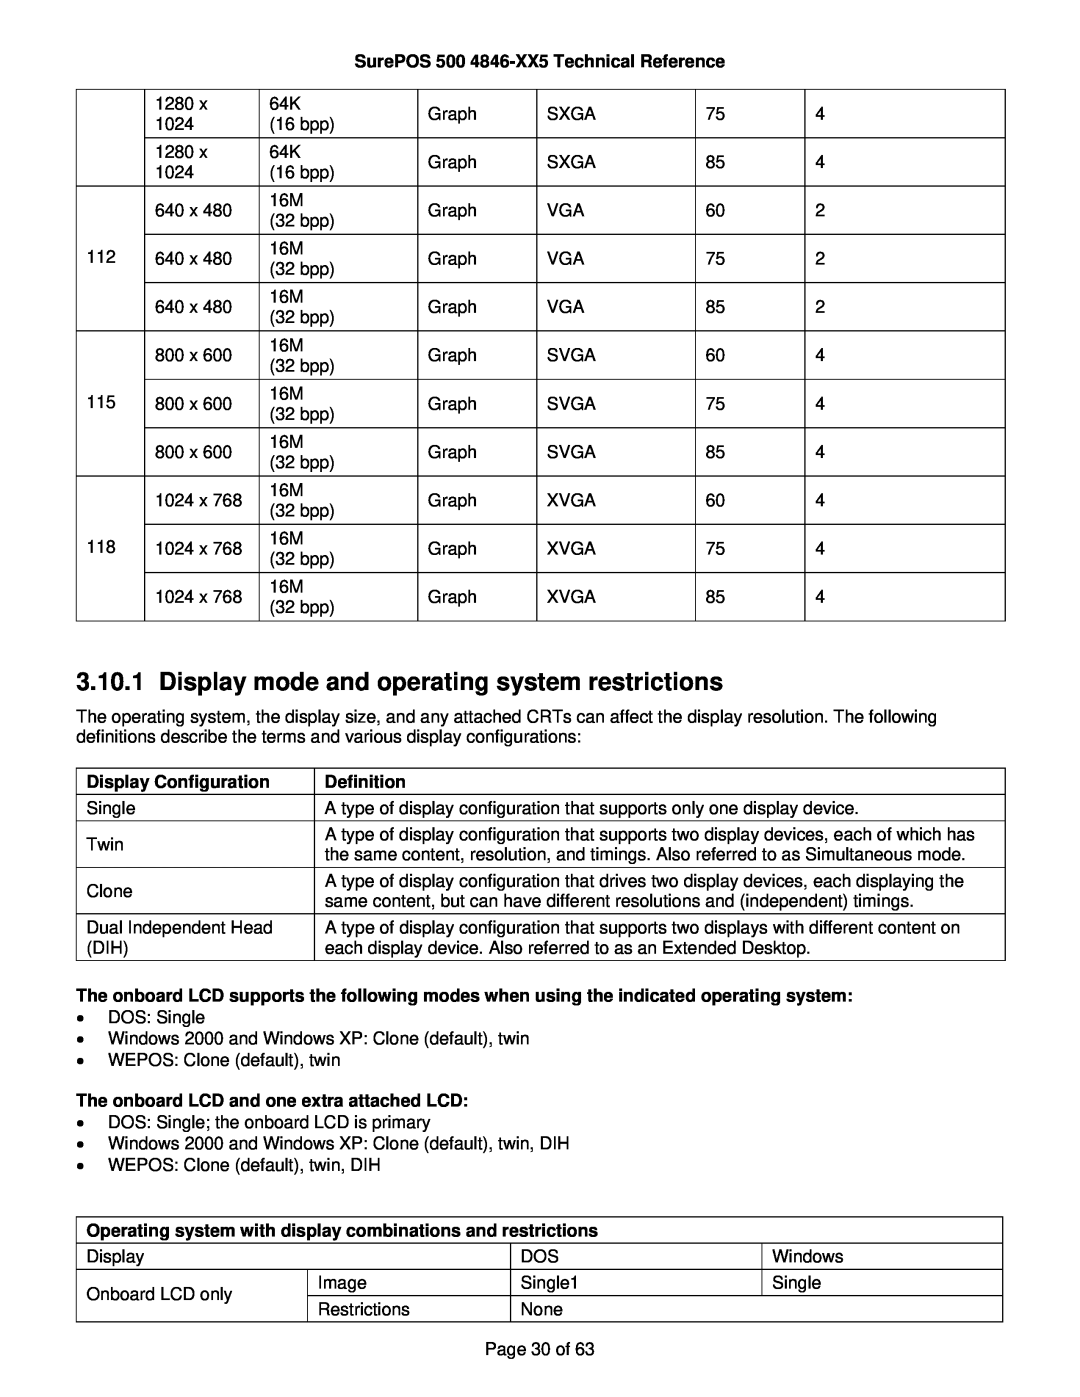 IBM Display mode and operating system restrictions, SurePOS 500 4846-XX5 Technical Reference, Display Configuration 